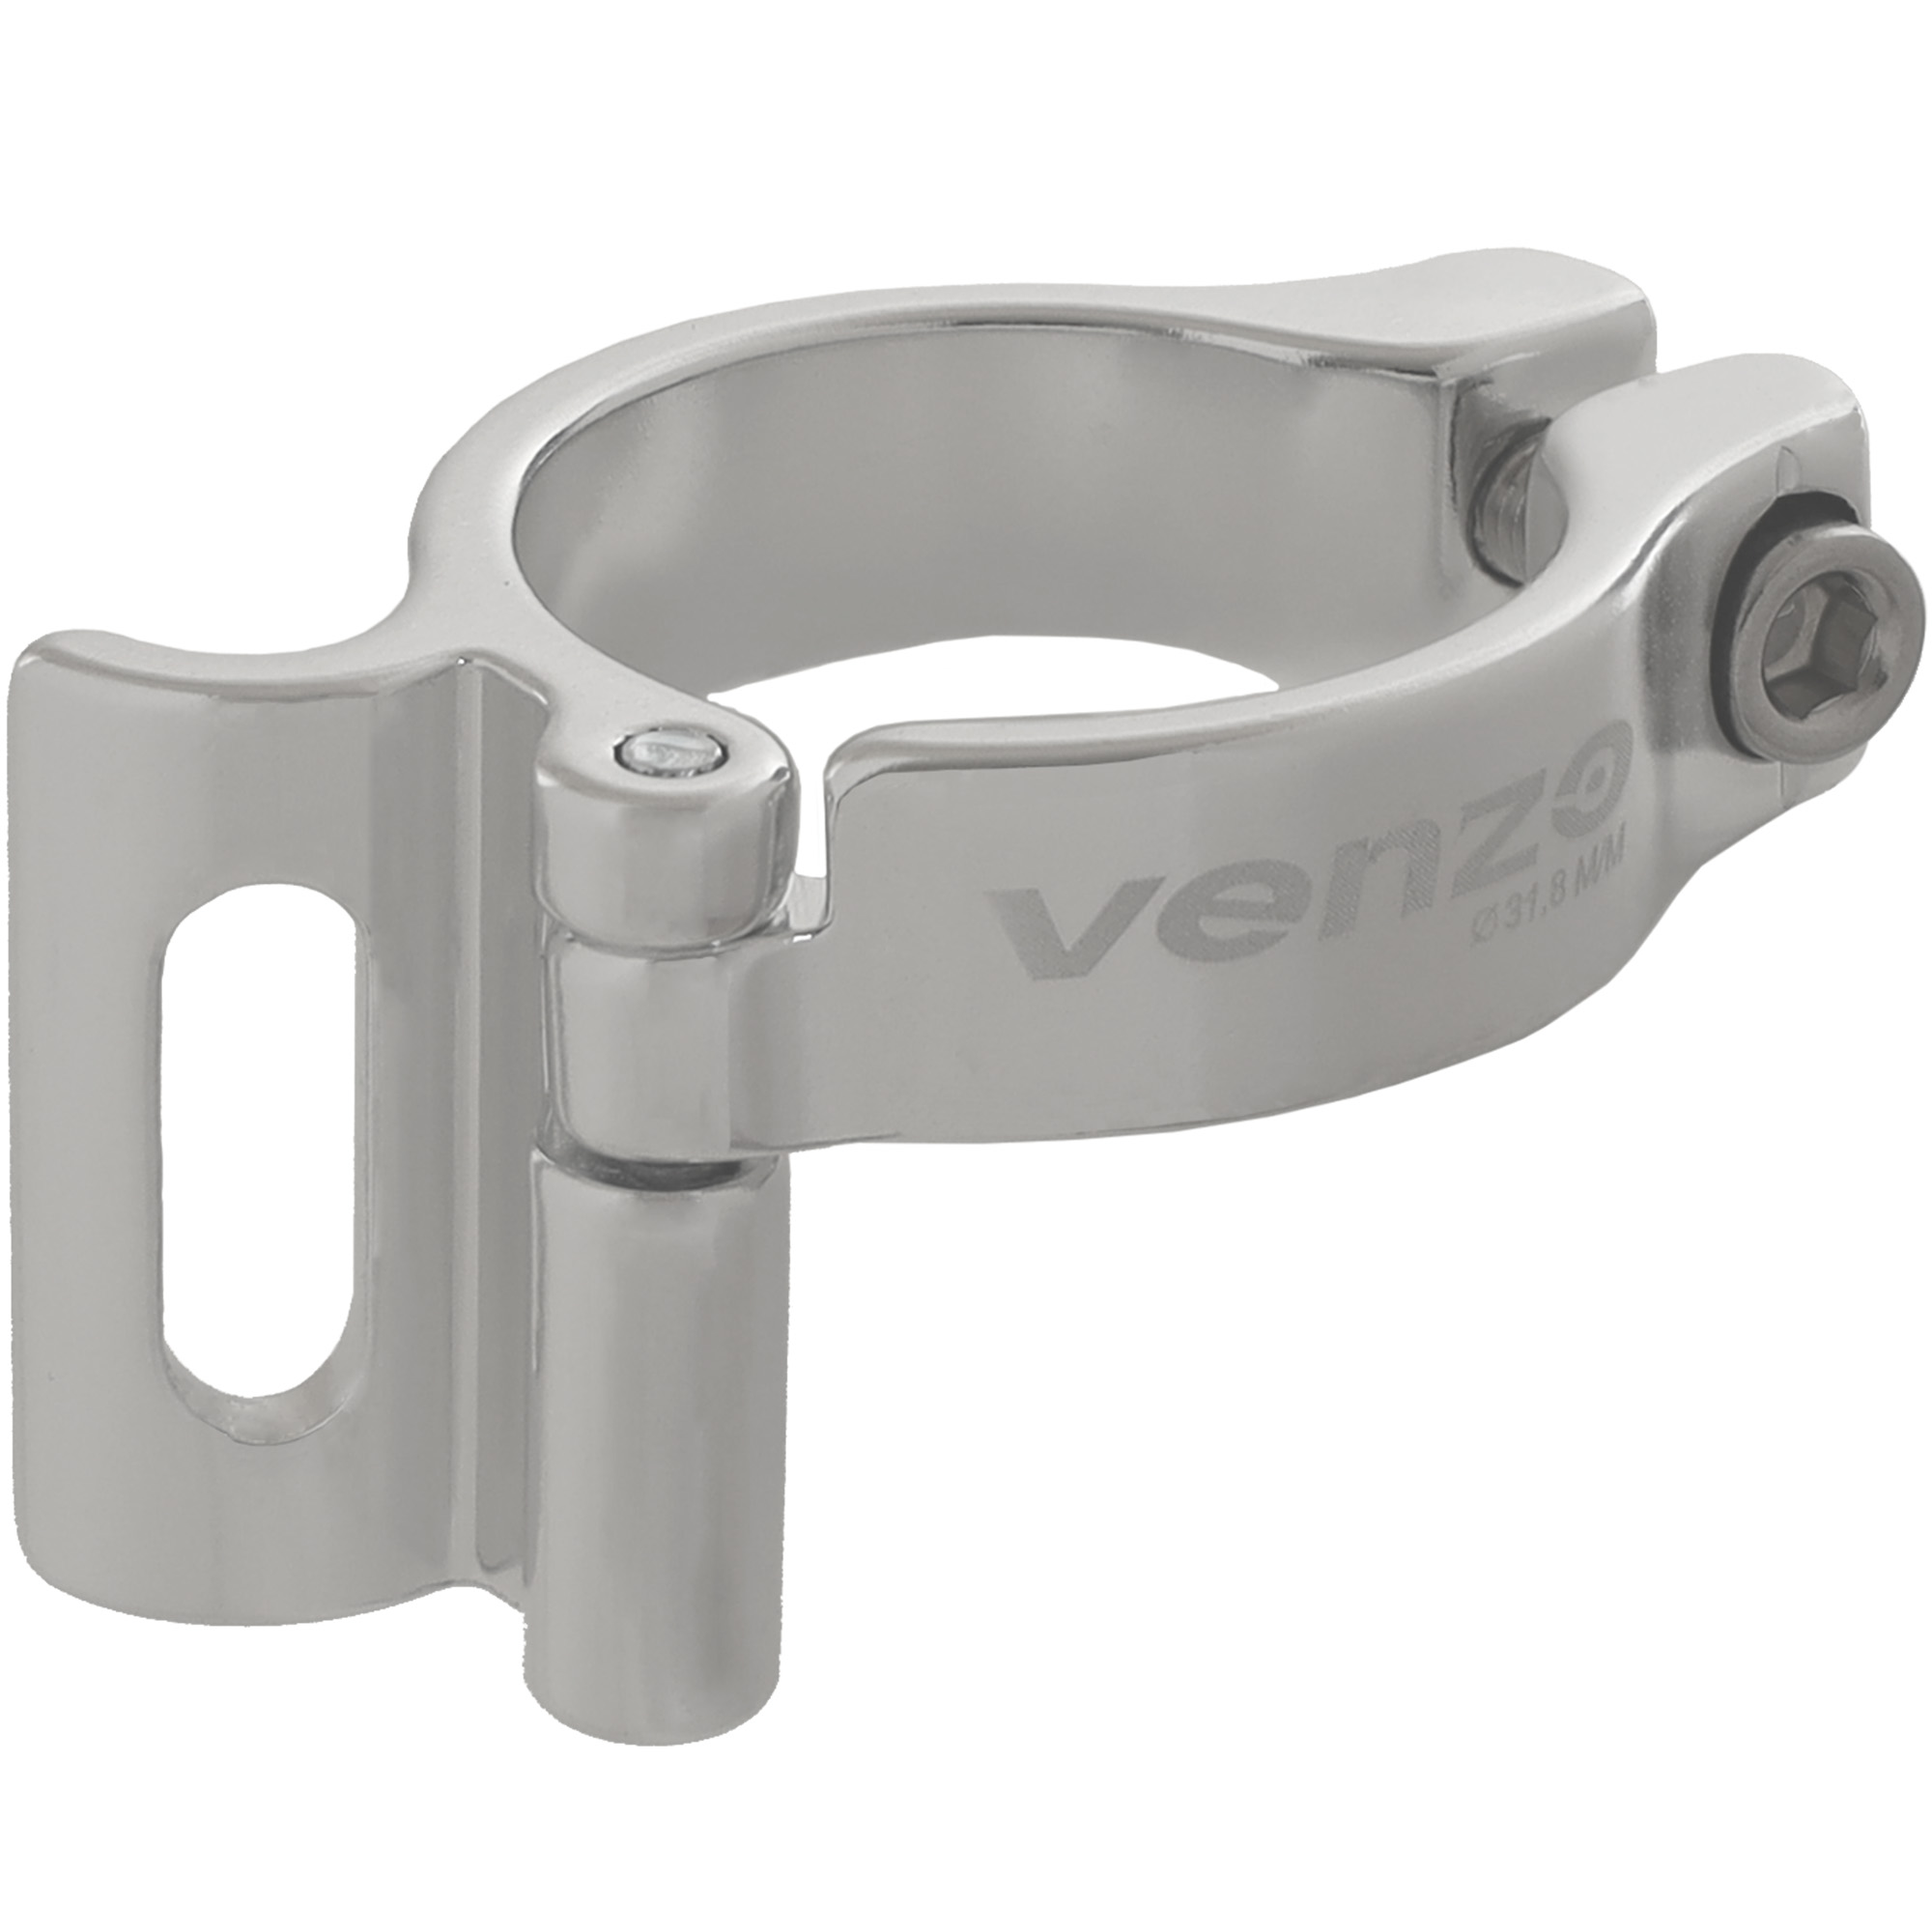 Venzo Road Mountain Bike Bicycle Adjustable Braze-on Front Derailleur Adapter Clamp 31.8mm Silver